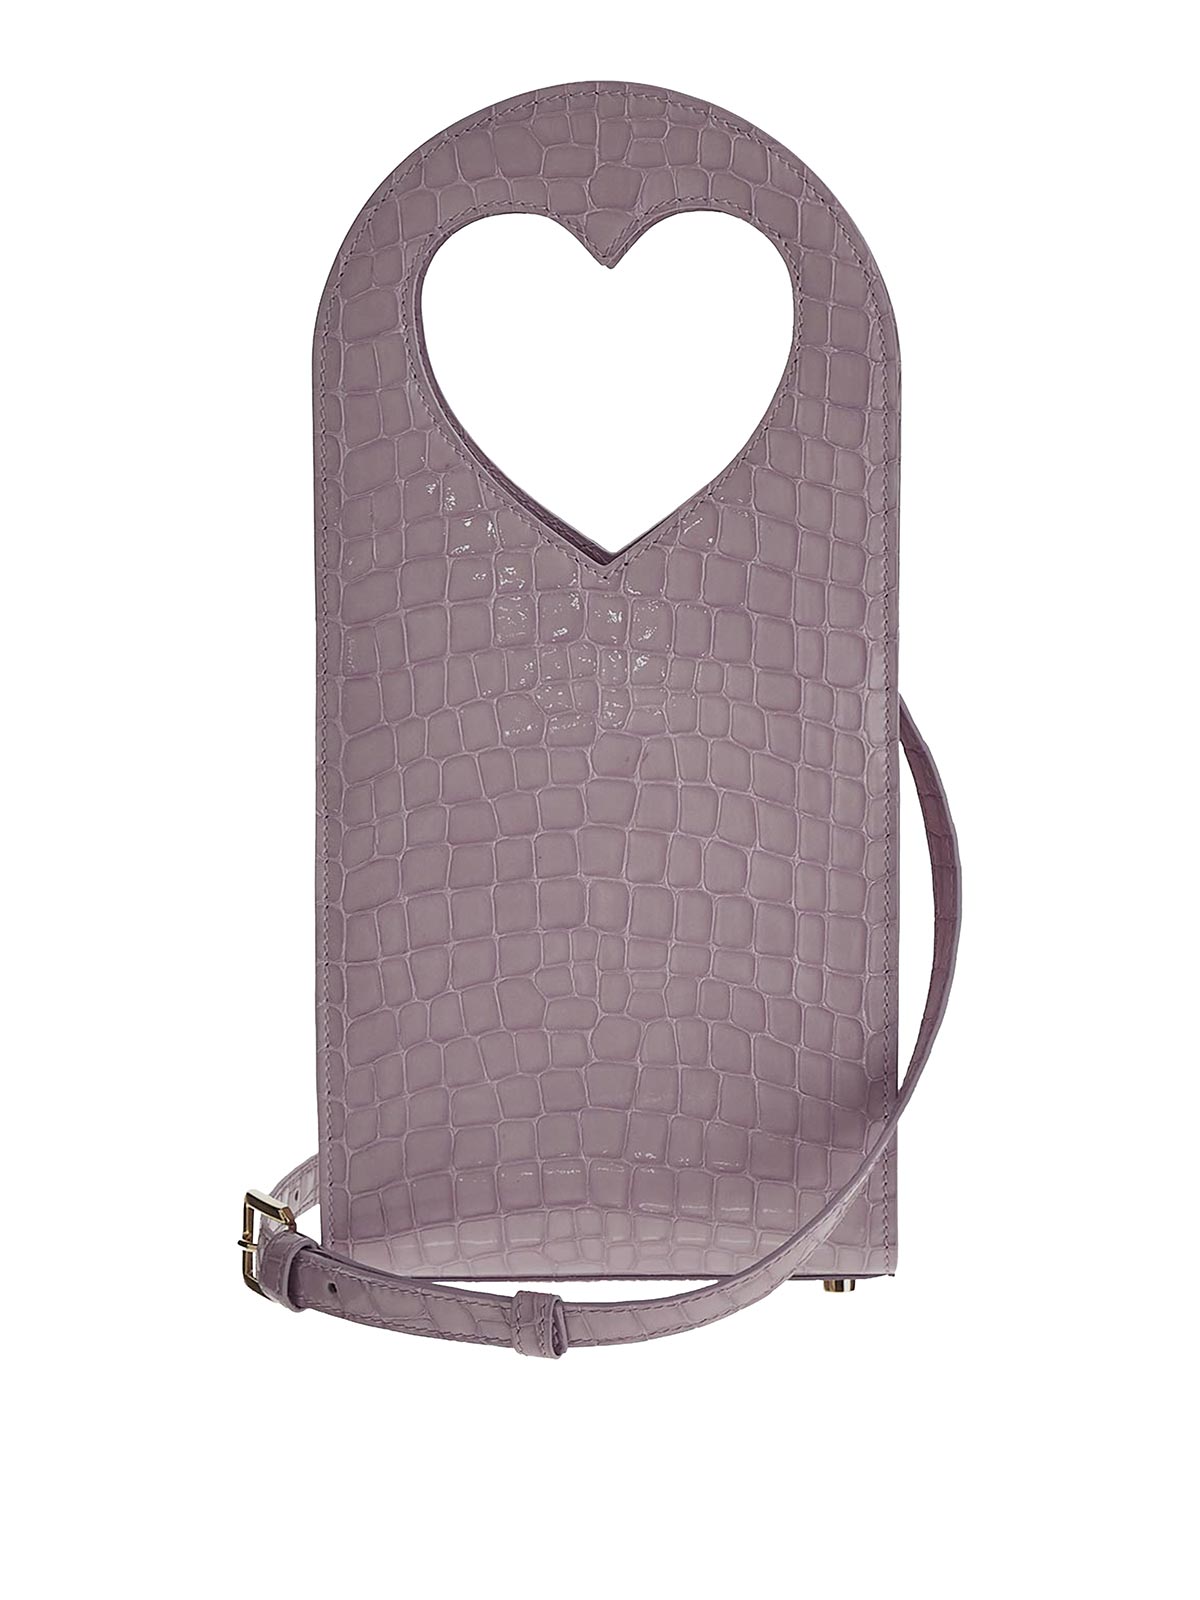 Marco Rambaldi Lilac Bag With Heart-shaped Top Handles In Purple